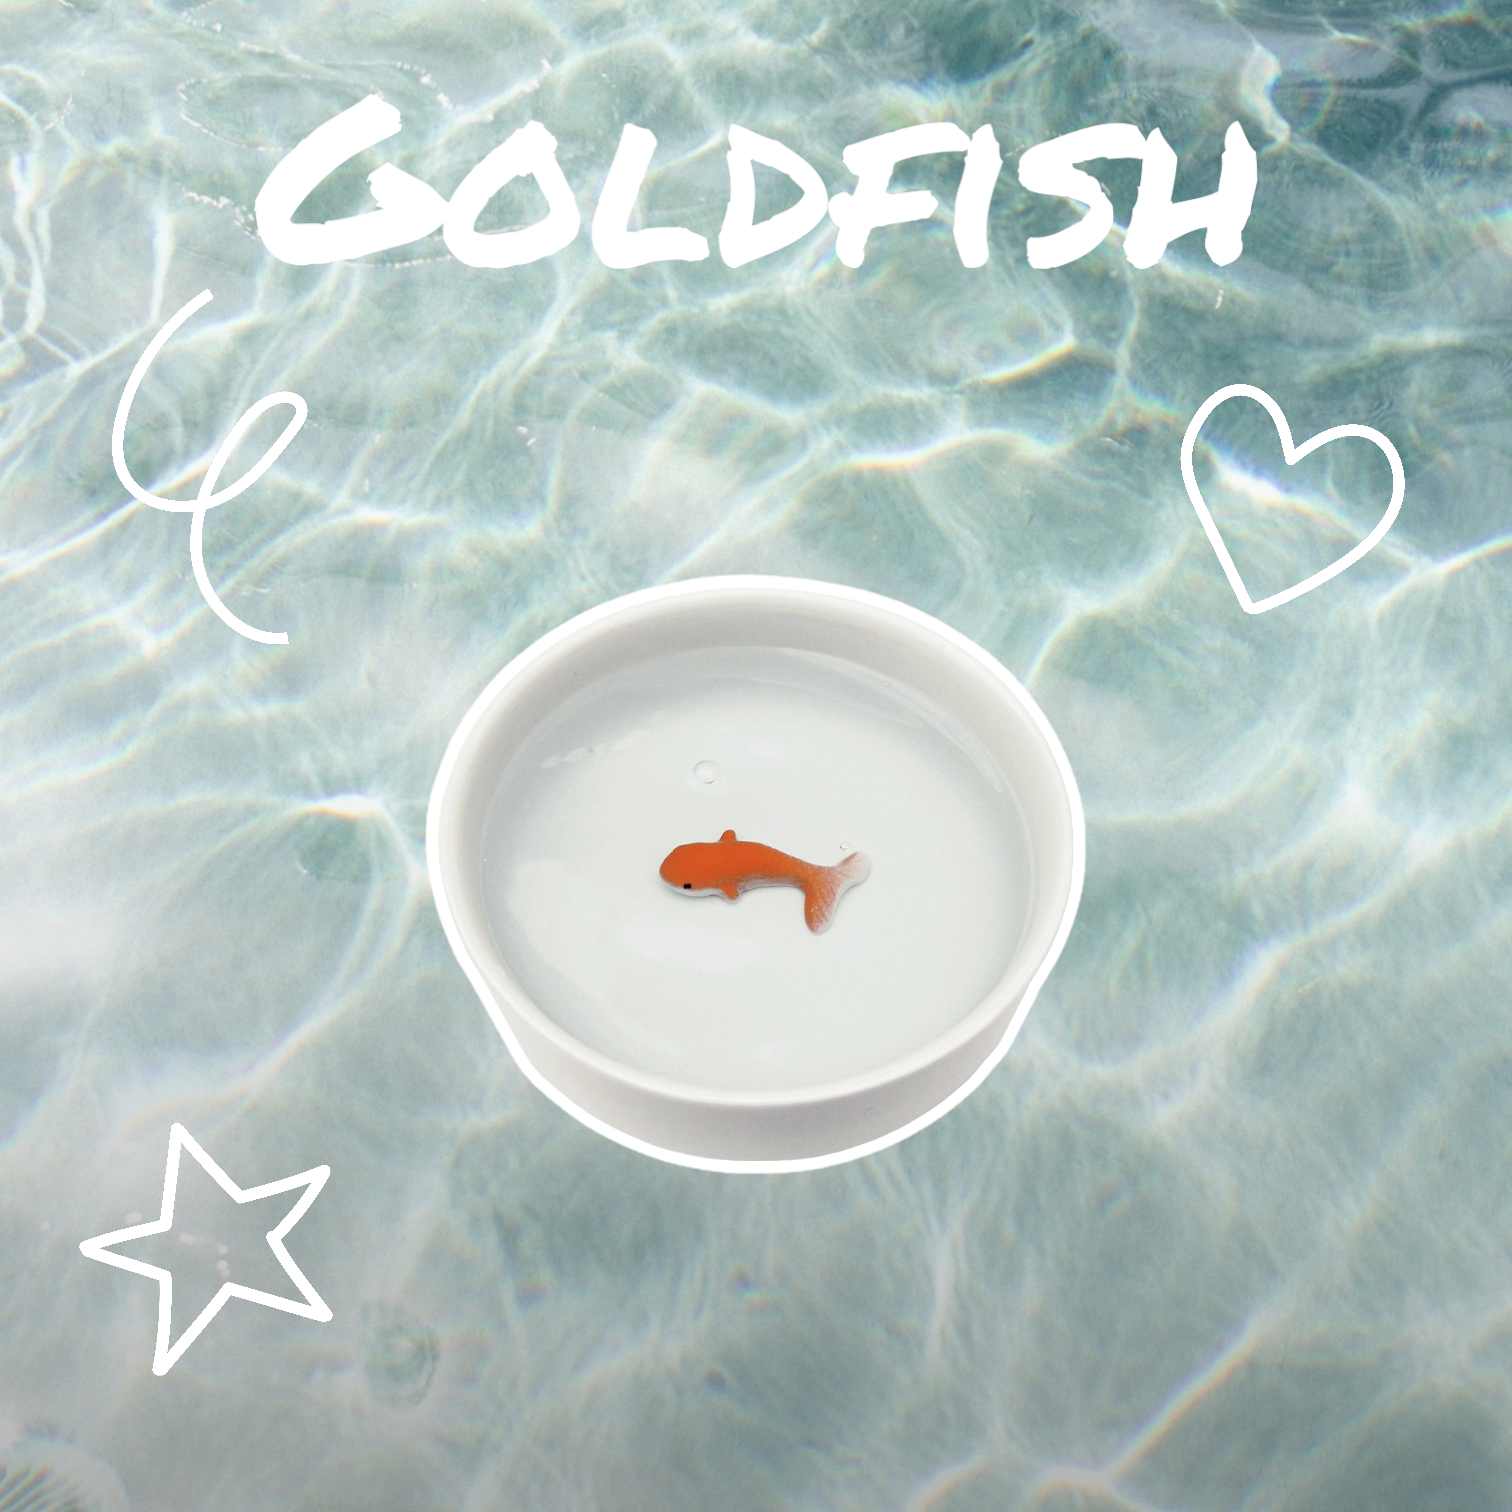 SUCK UK Cat Bowl - Goldfish: A Whimsical Dining Experience